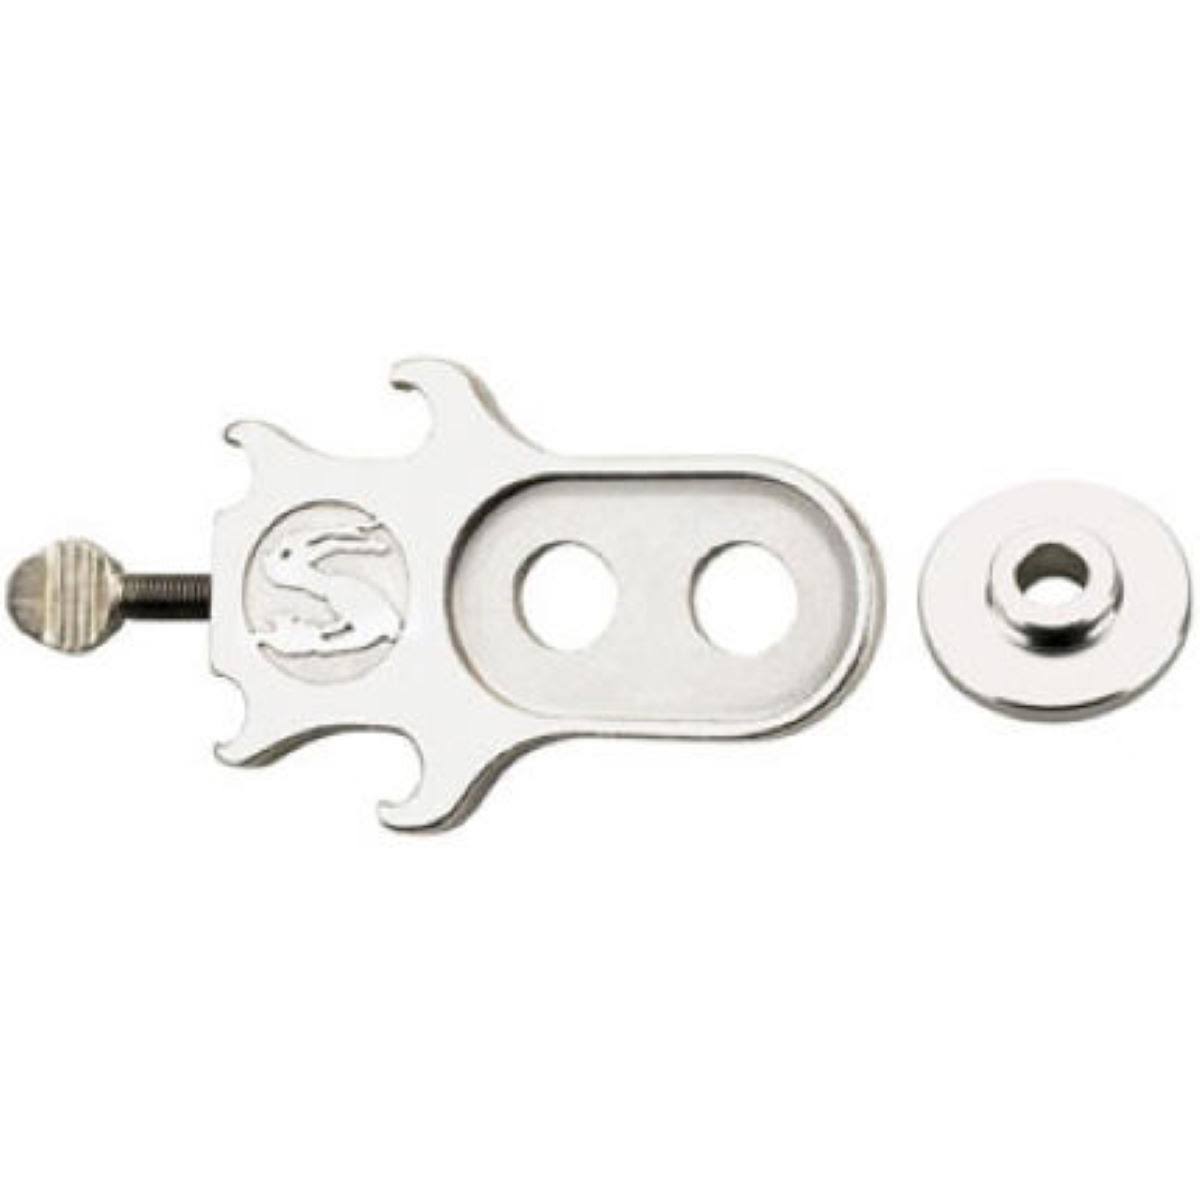 Surly Tuggnut Chain Tensioner with Bottle Opener - Silver